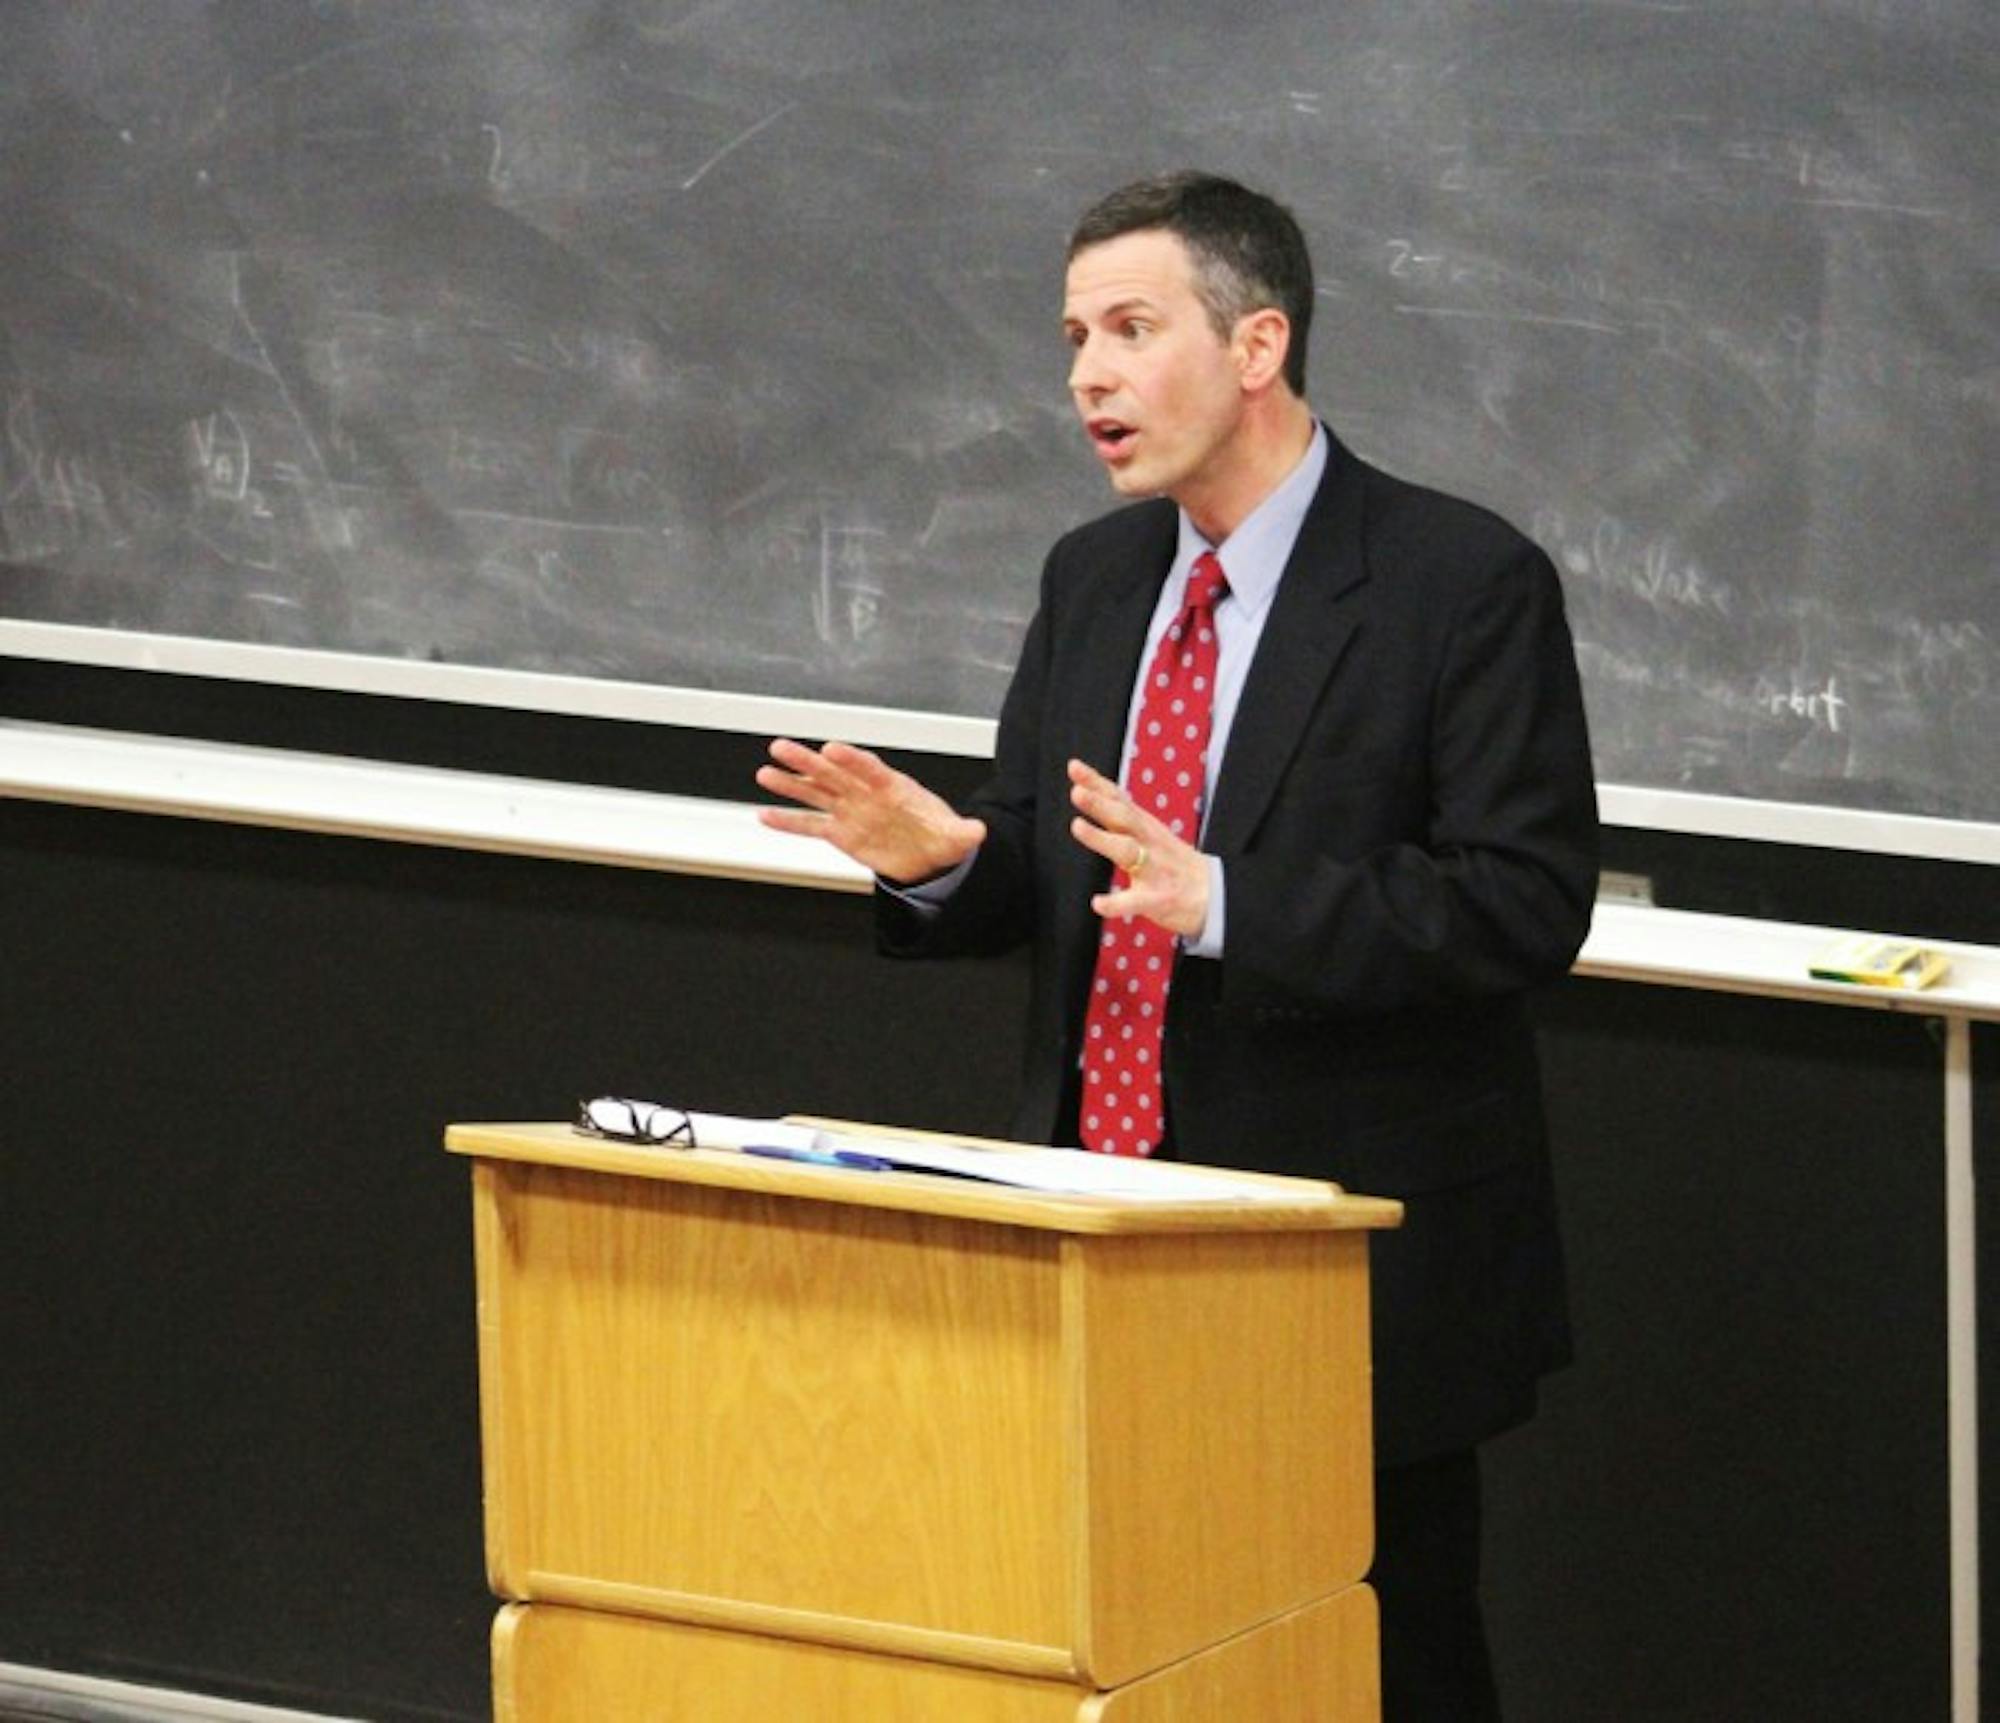 Anthony J. Bellia Jr., former clerk for Supreme Court Justice Antonin Scalia, explores the lingering implications of Scalia’s death on future Supreme Court rulings  in a lecture Wednesday night.